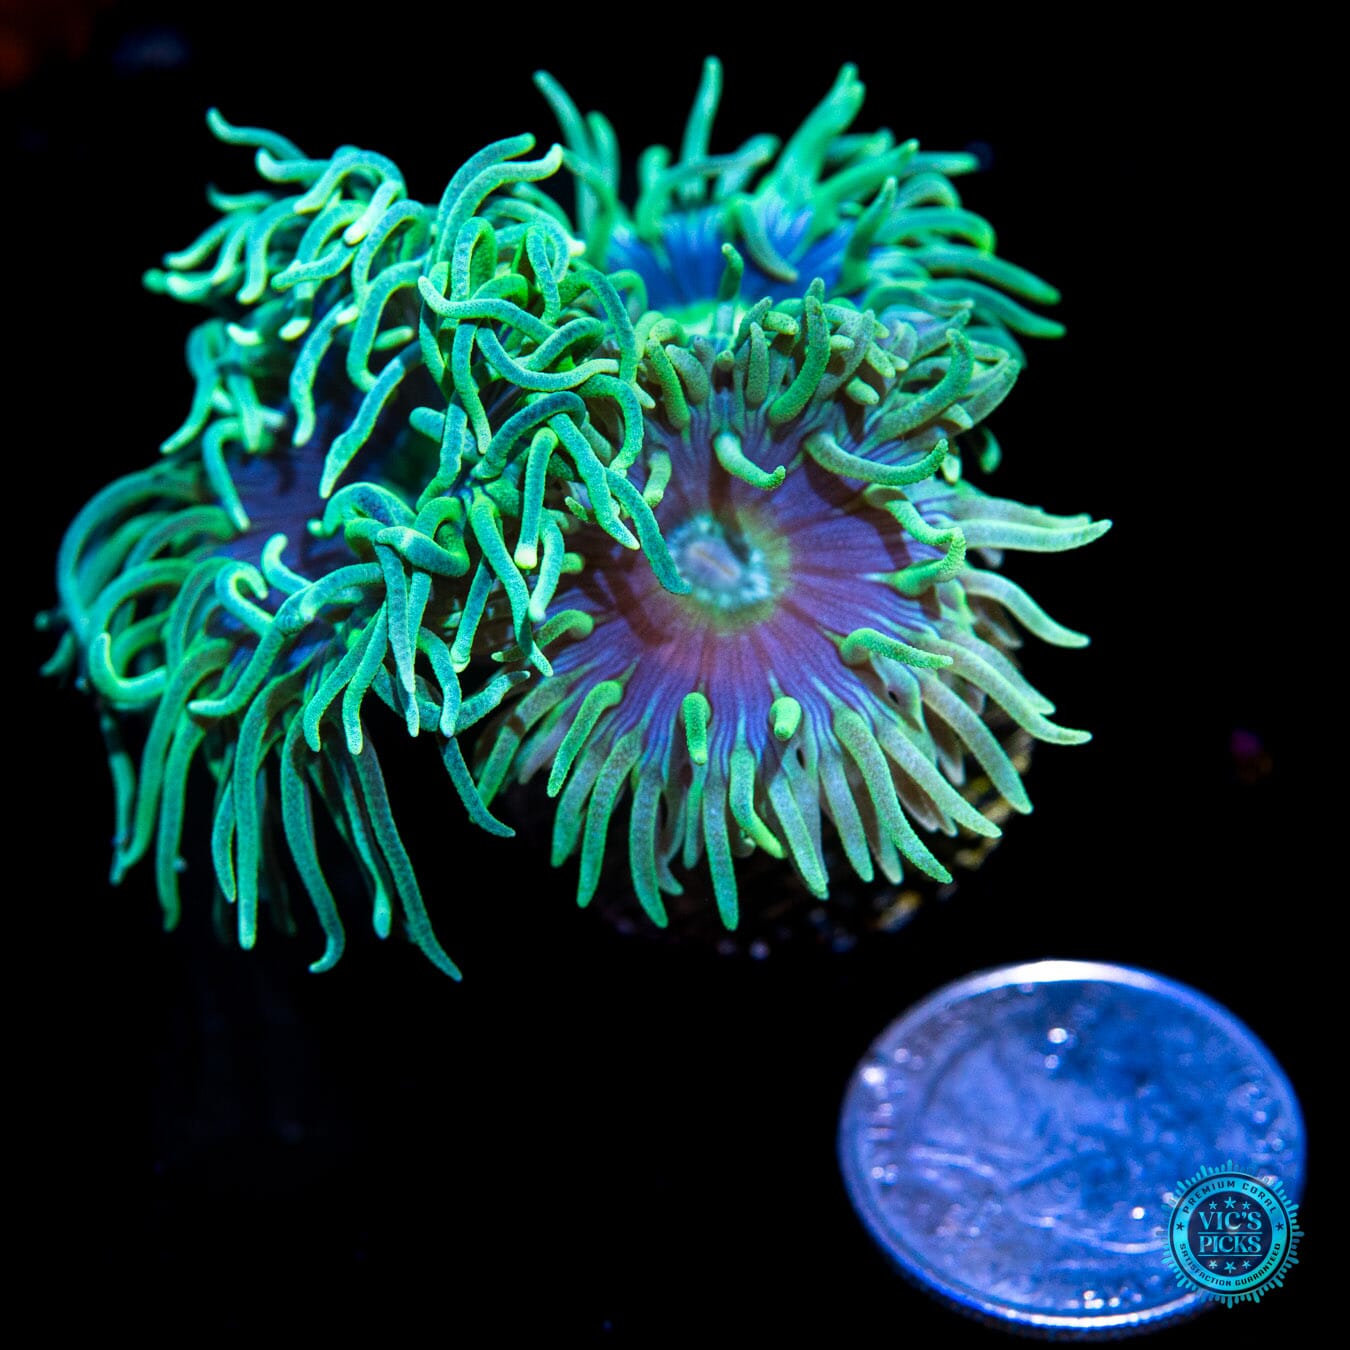 WWC Blue Ring Duncan - Actinic Photo